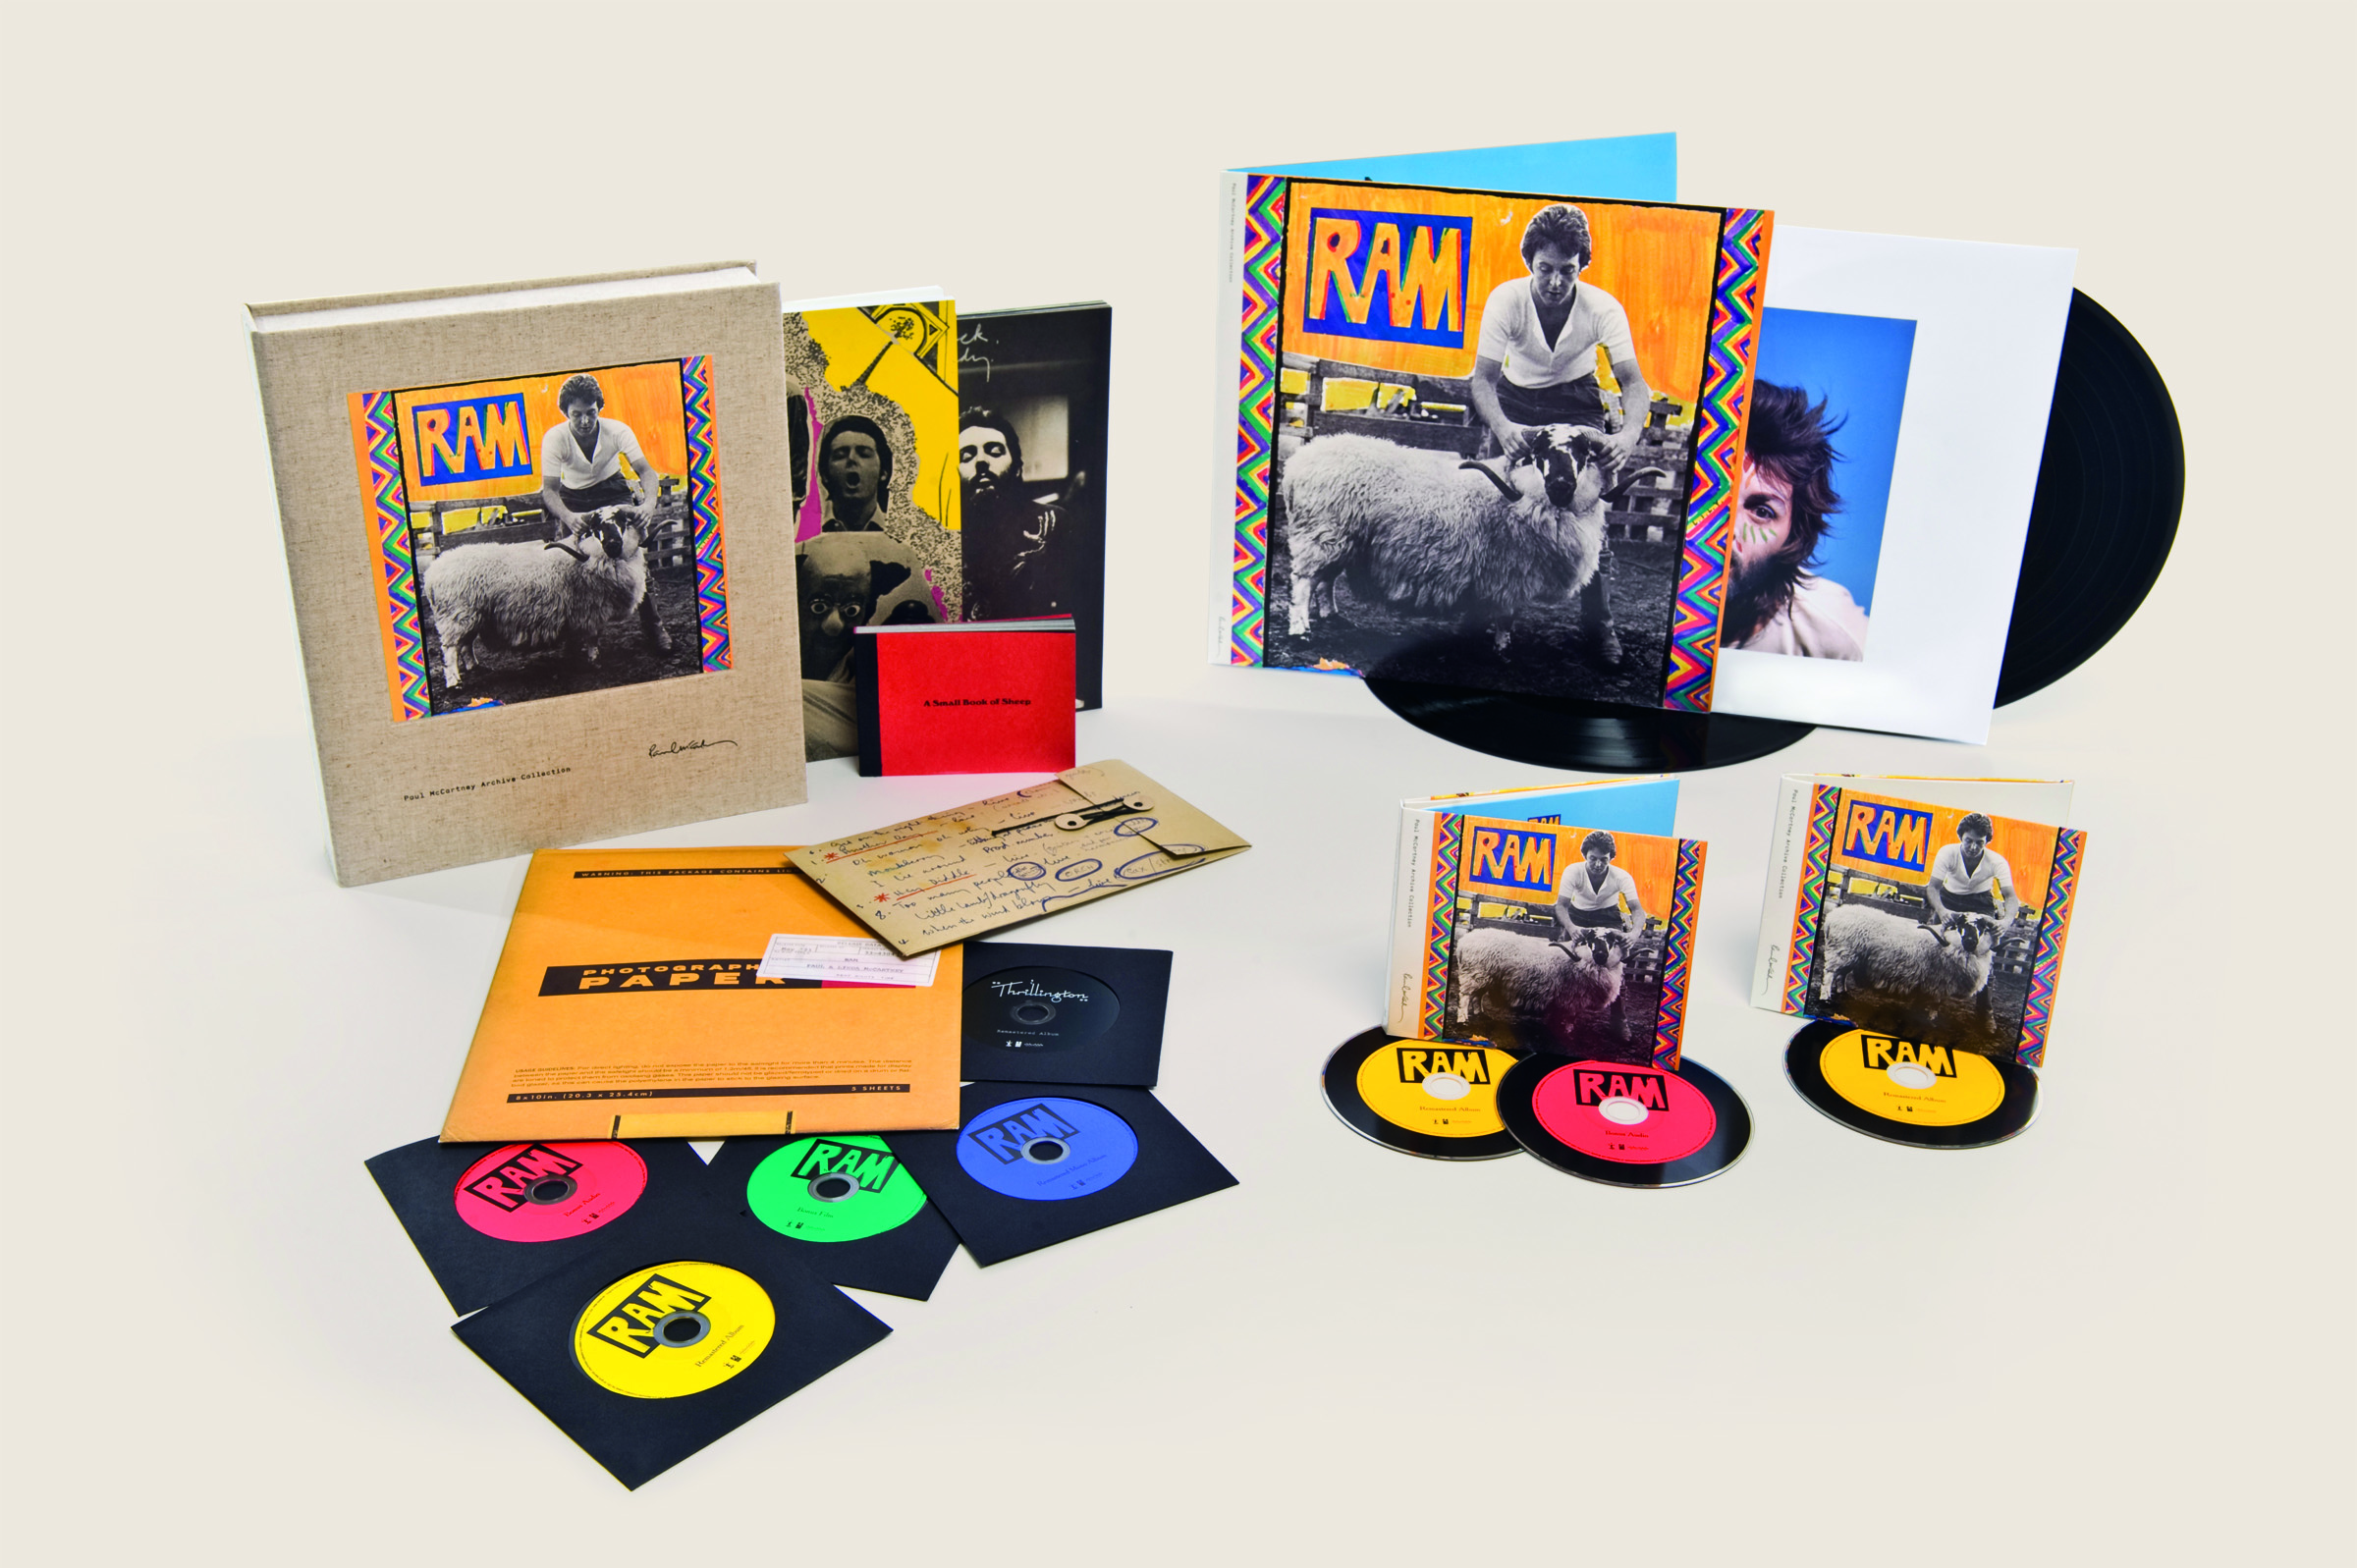 Ram - Archive Collection • Official album by Paul & Linda McCartney